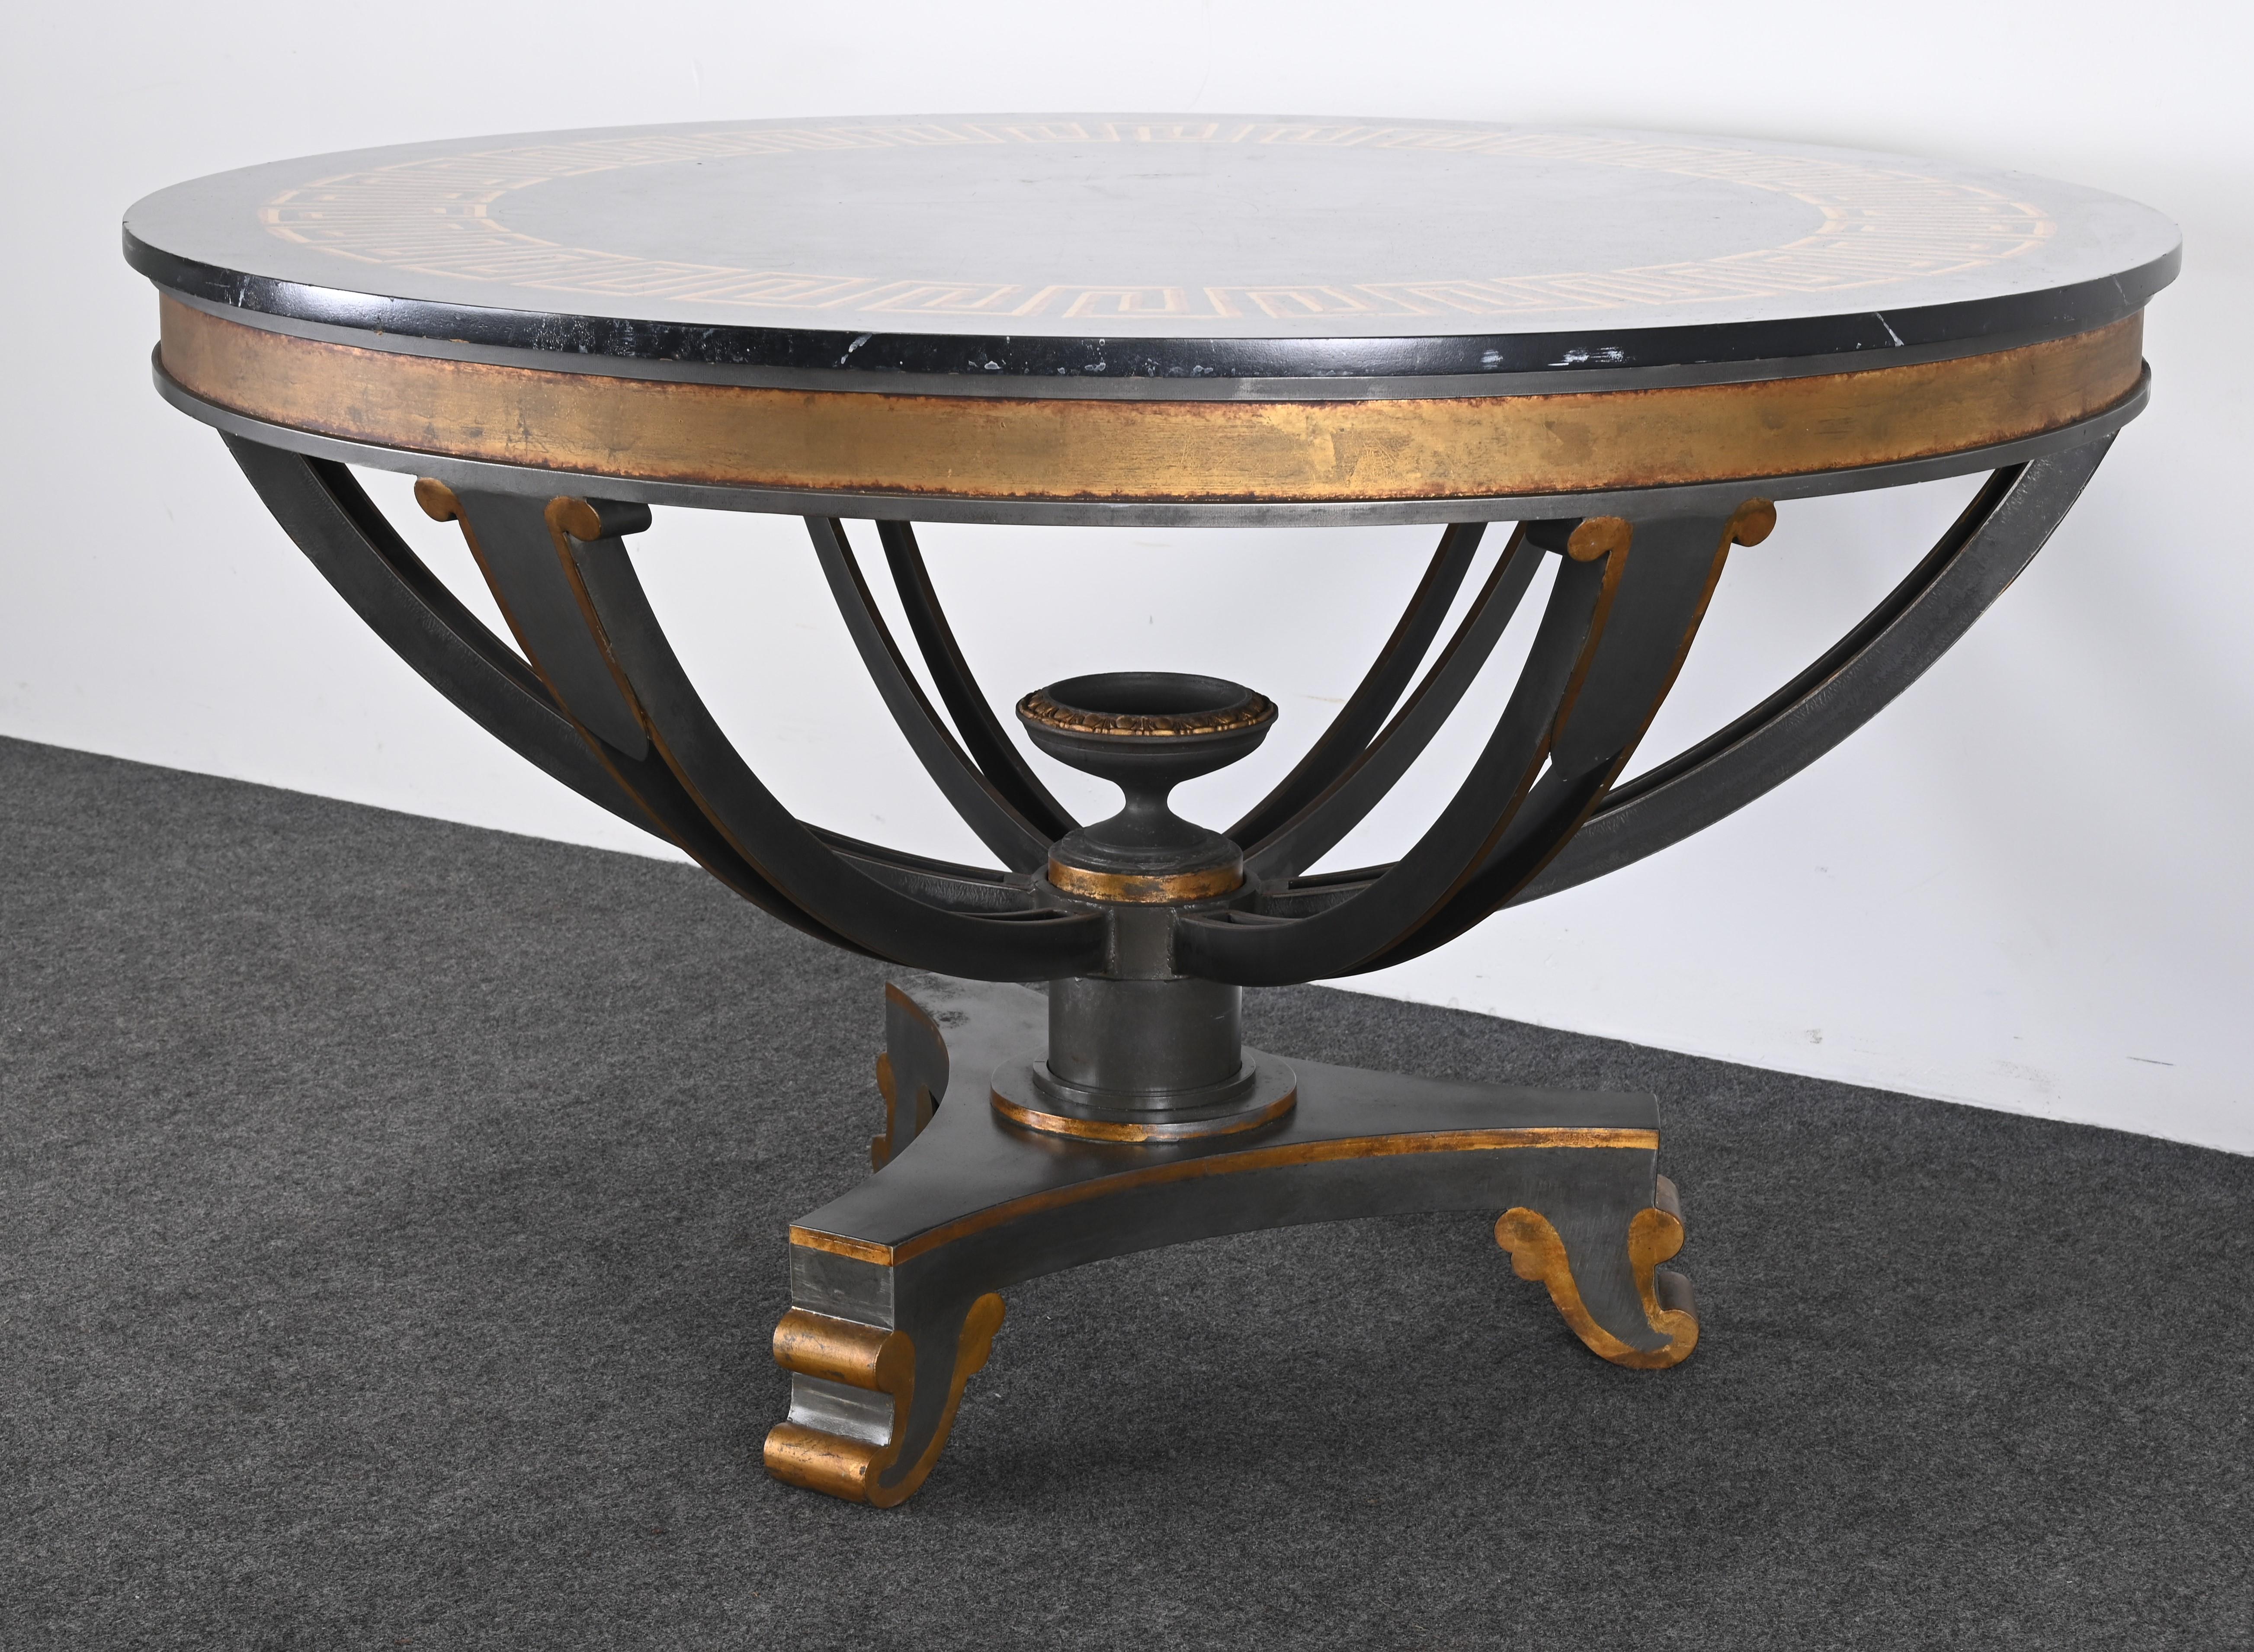 Monumental Table by Niermann Weeks with Neo Classical Top, 20th Century For Sale 2